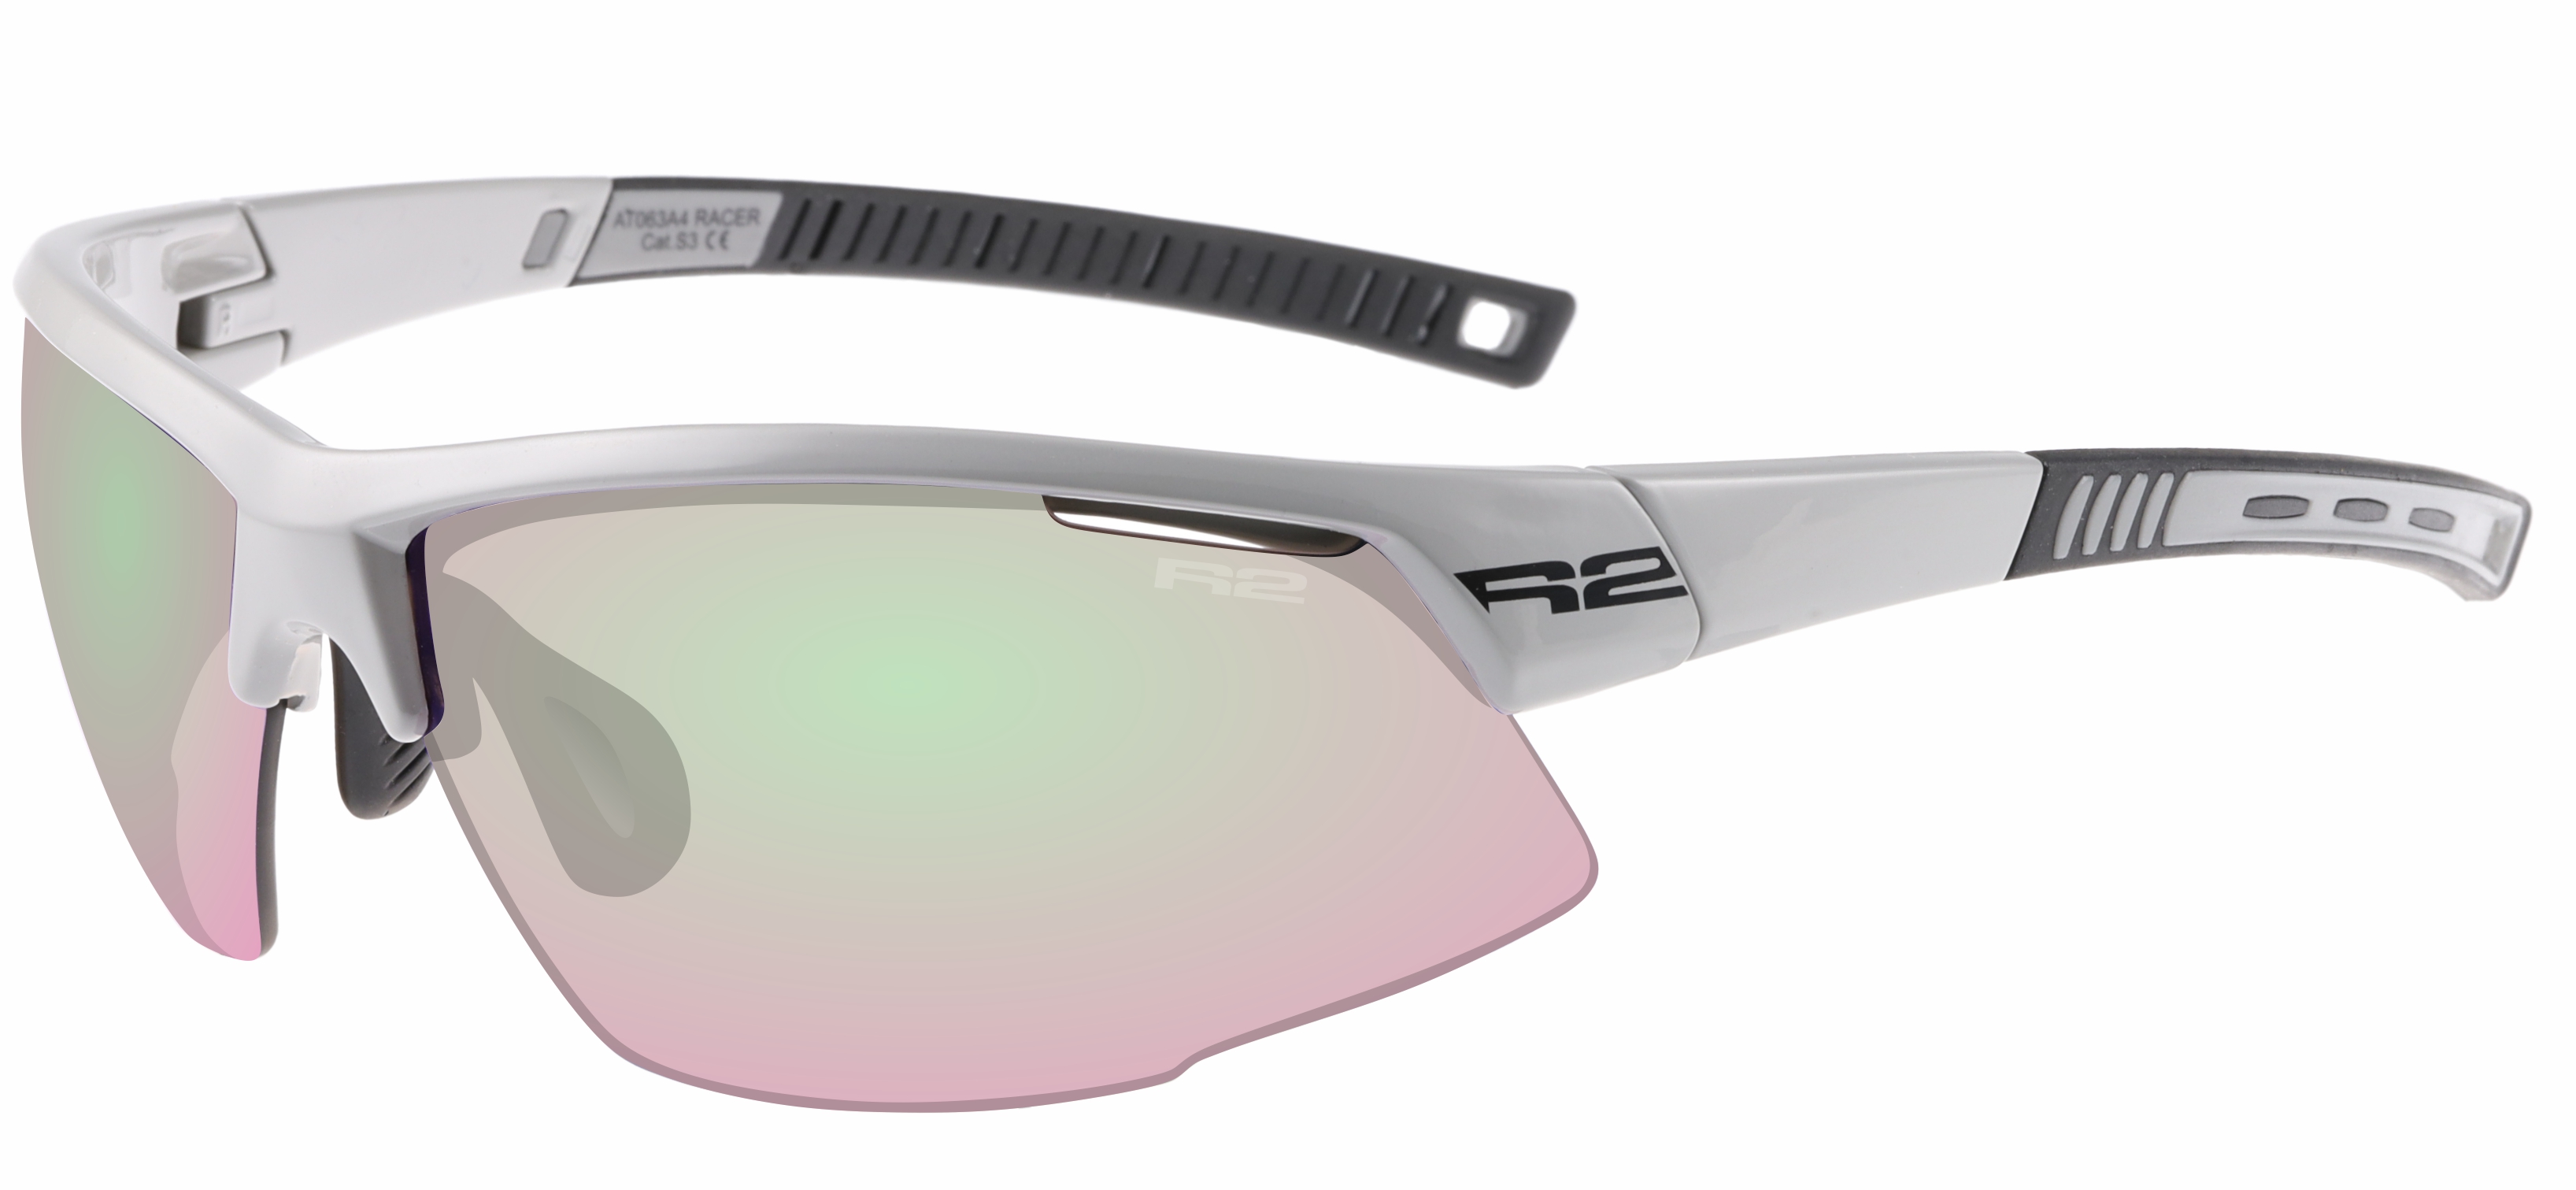 Sport sunglasses R2 RACER AT063A4